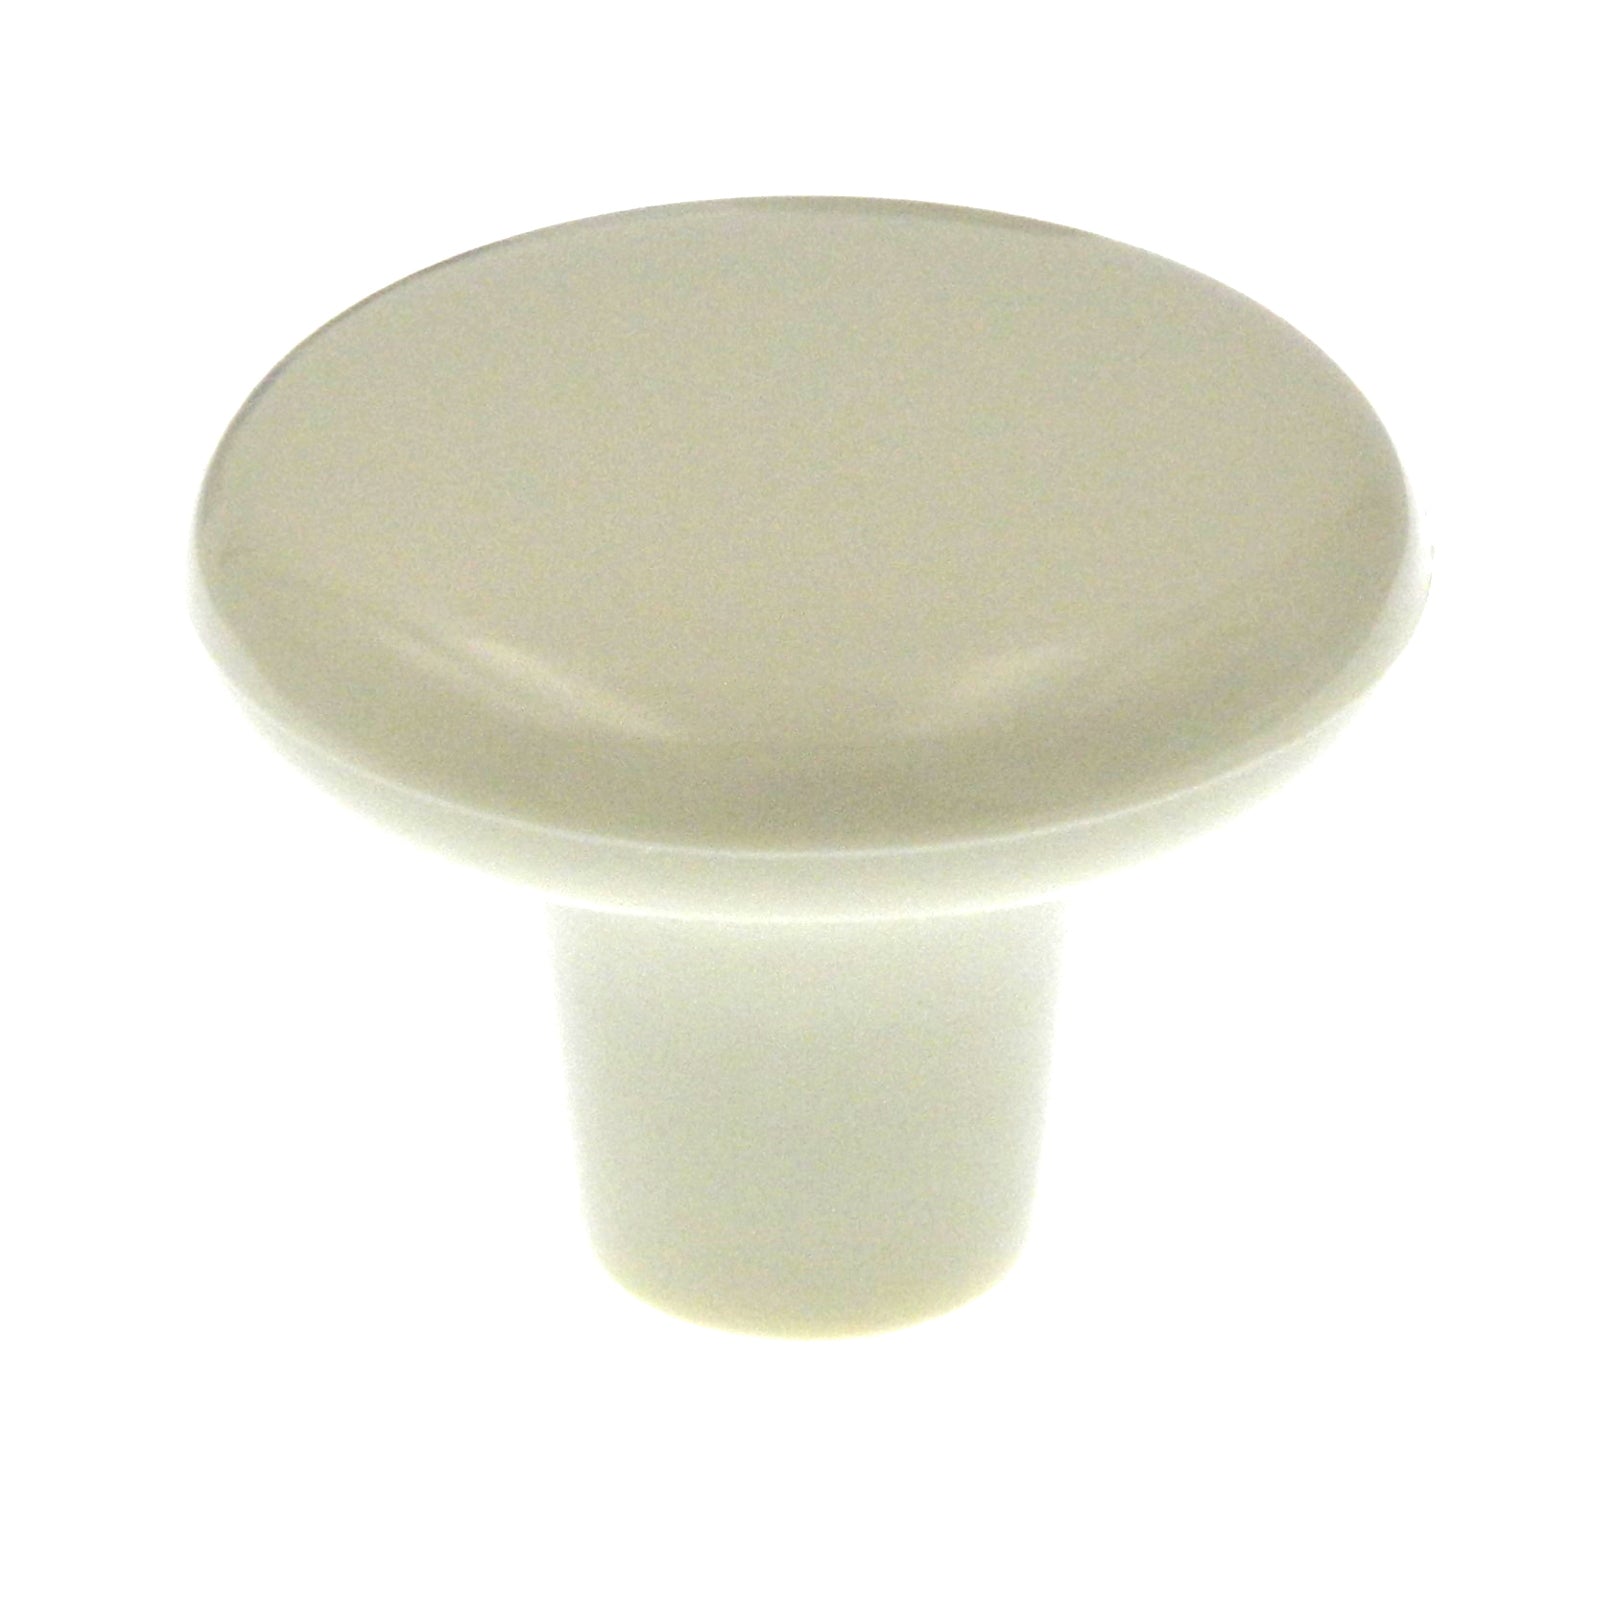 Hickory Hardware Midway Light Almond Round Smooth 1 1/2" Cabinet Knob P865-LAD